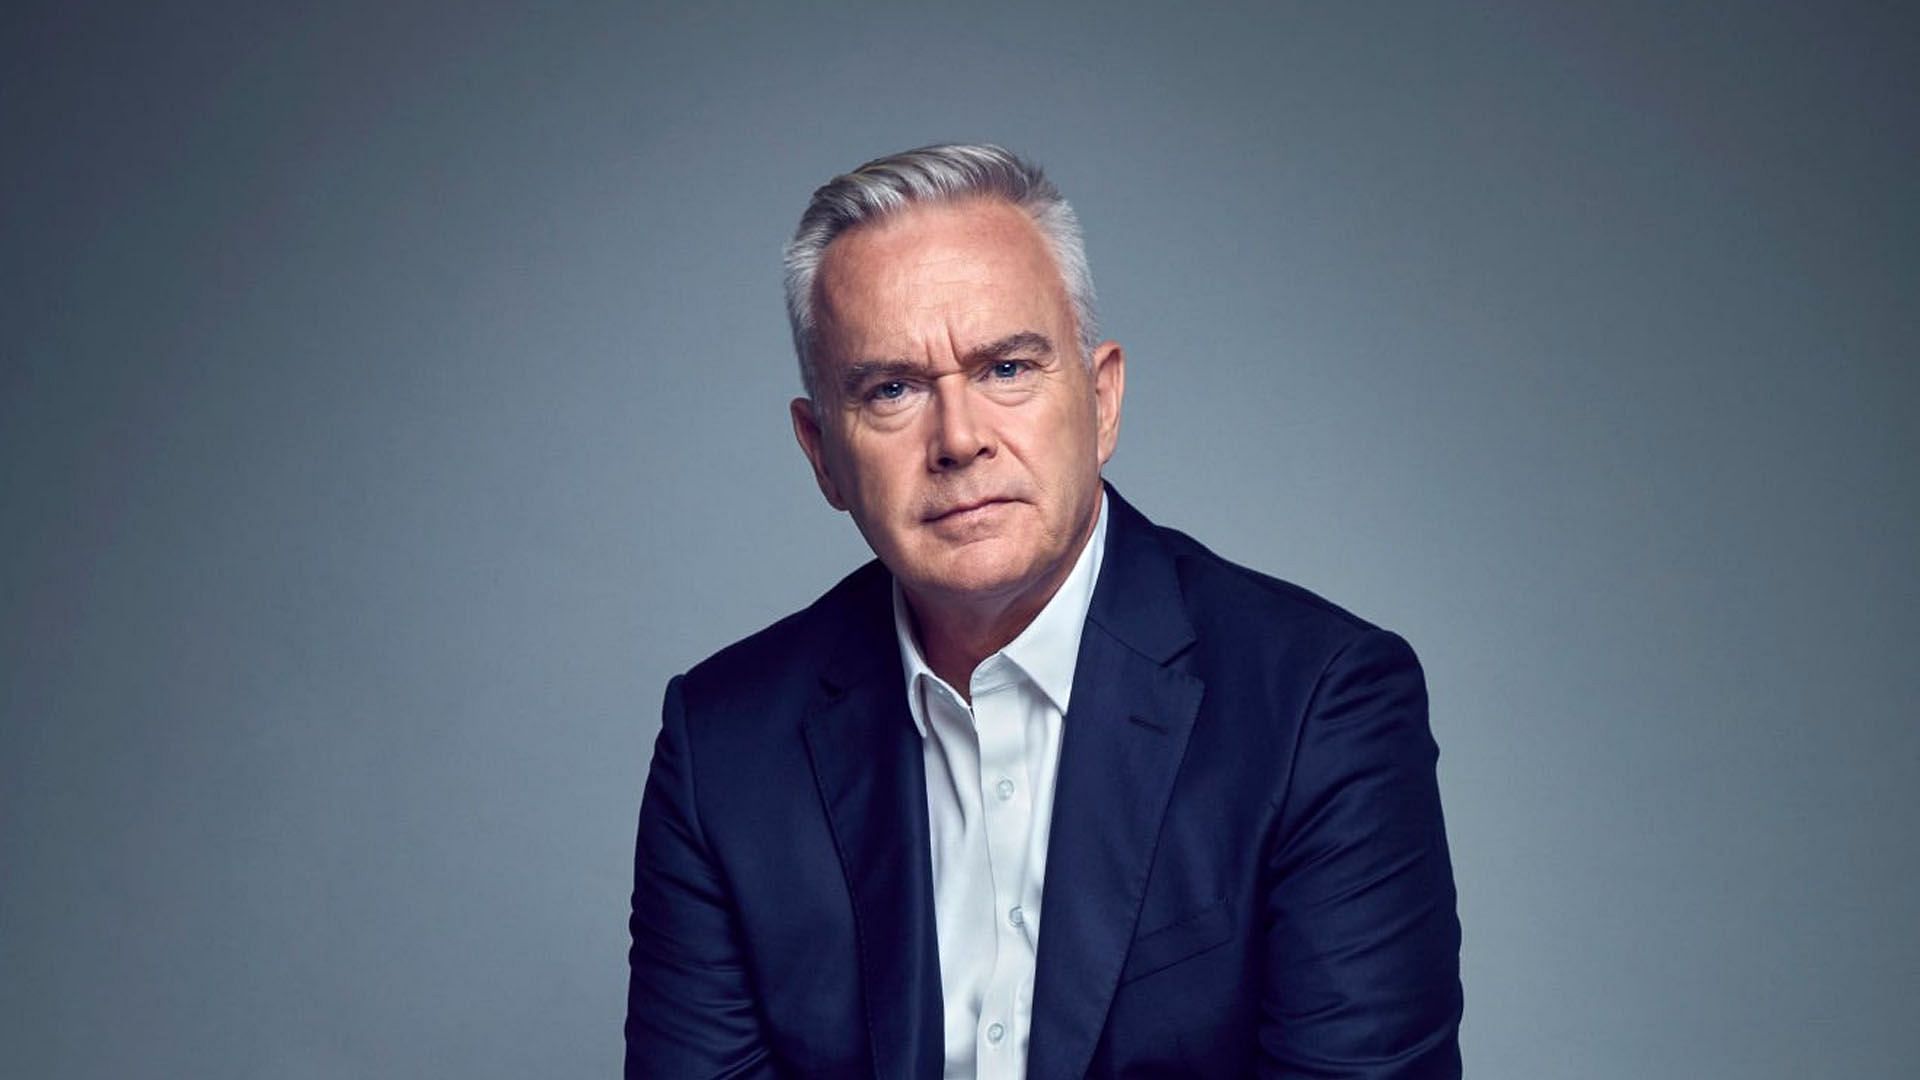 News of BBC broadcaster Huw Edwards